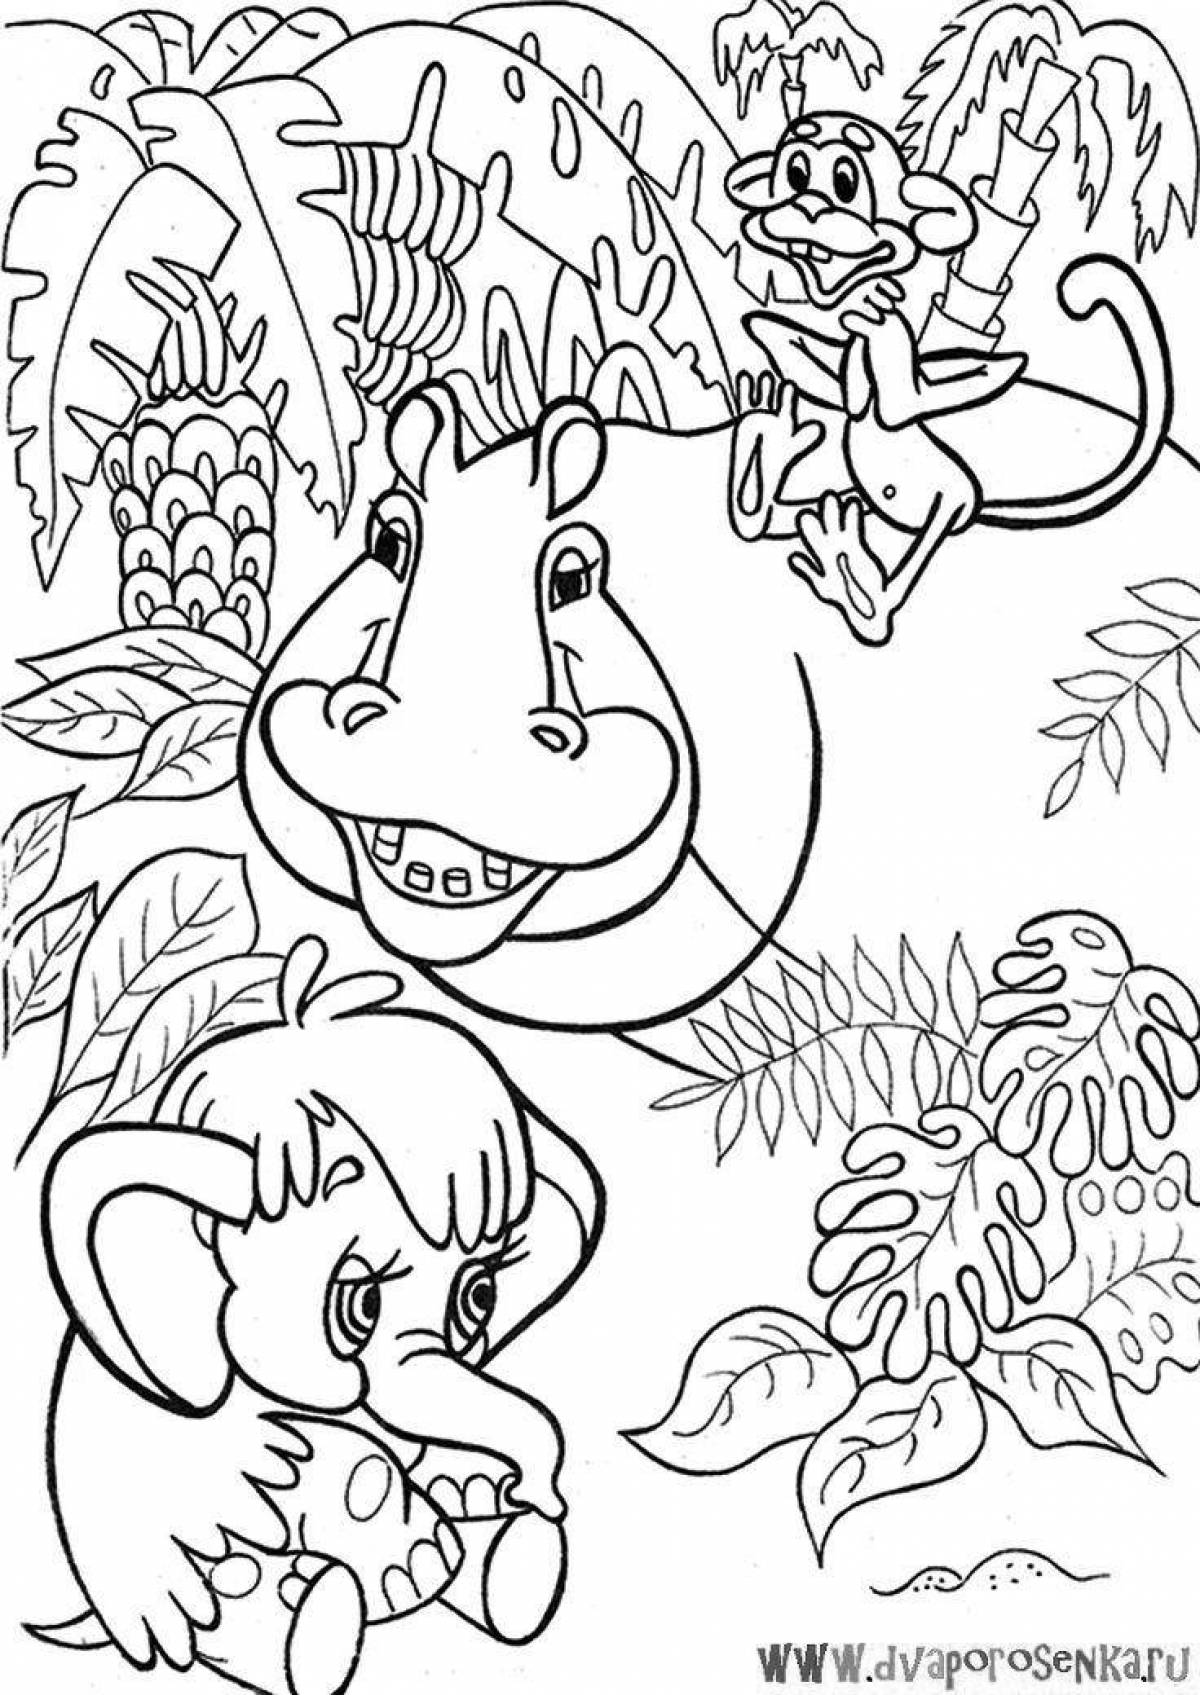 Coloring page wonderful mammoth